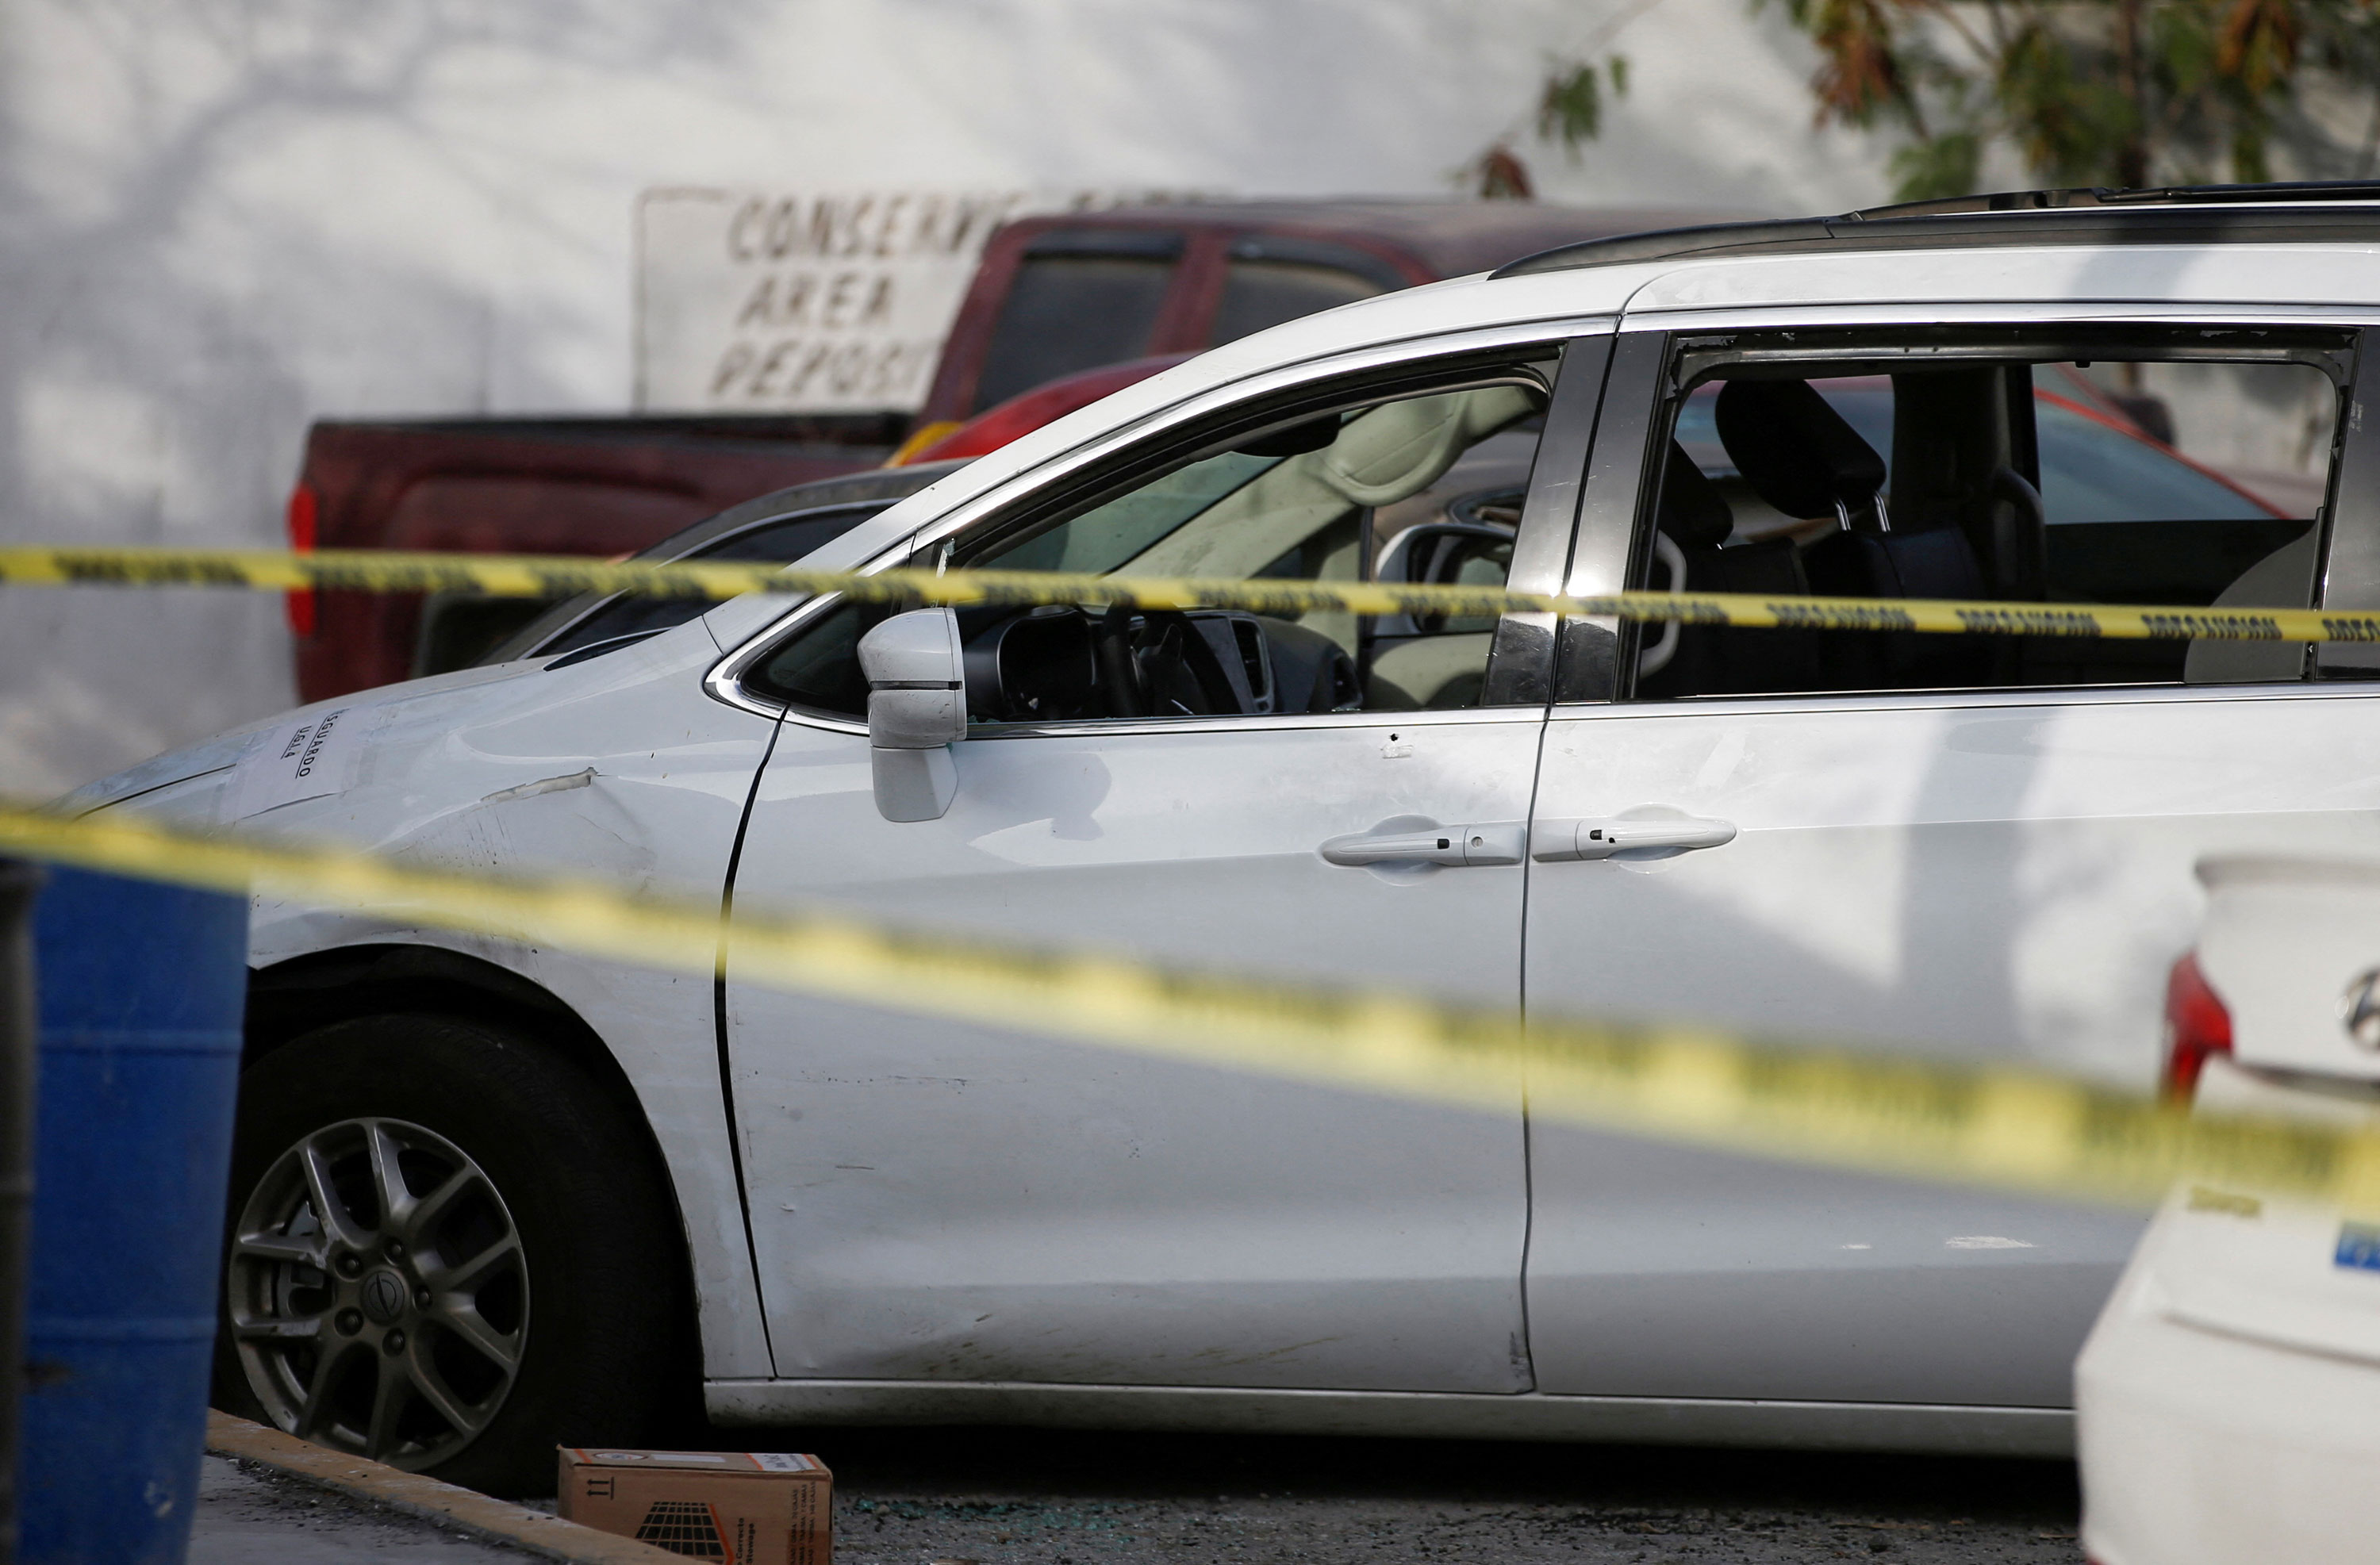 The car driven by the four Americans who were kidnapped is seen secured outside the Forensic Medical Service morgue building in Matamoros, Mexico, on Tuesday.